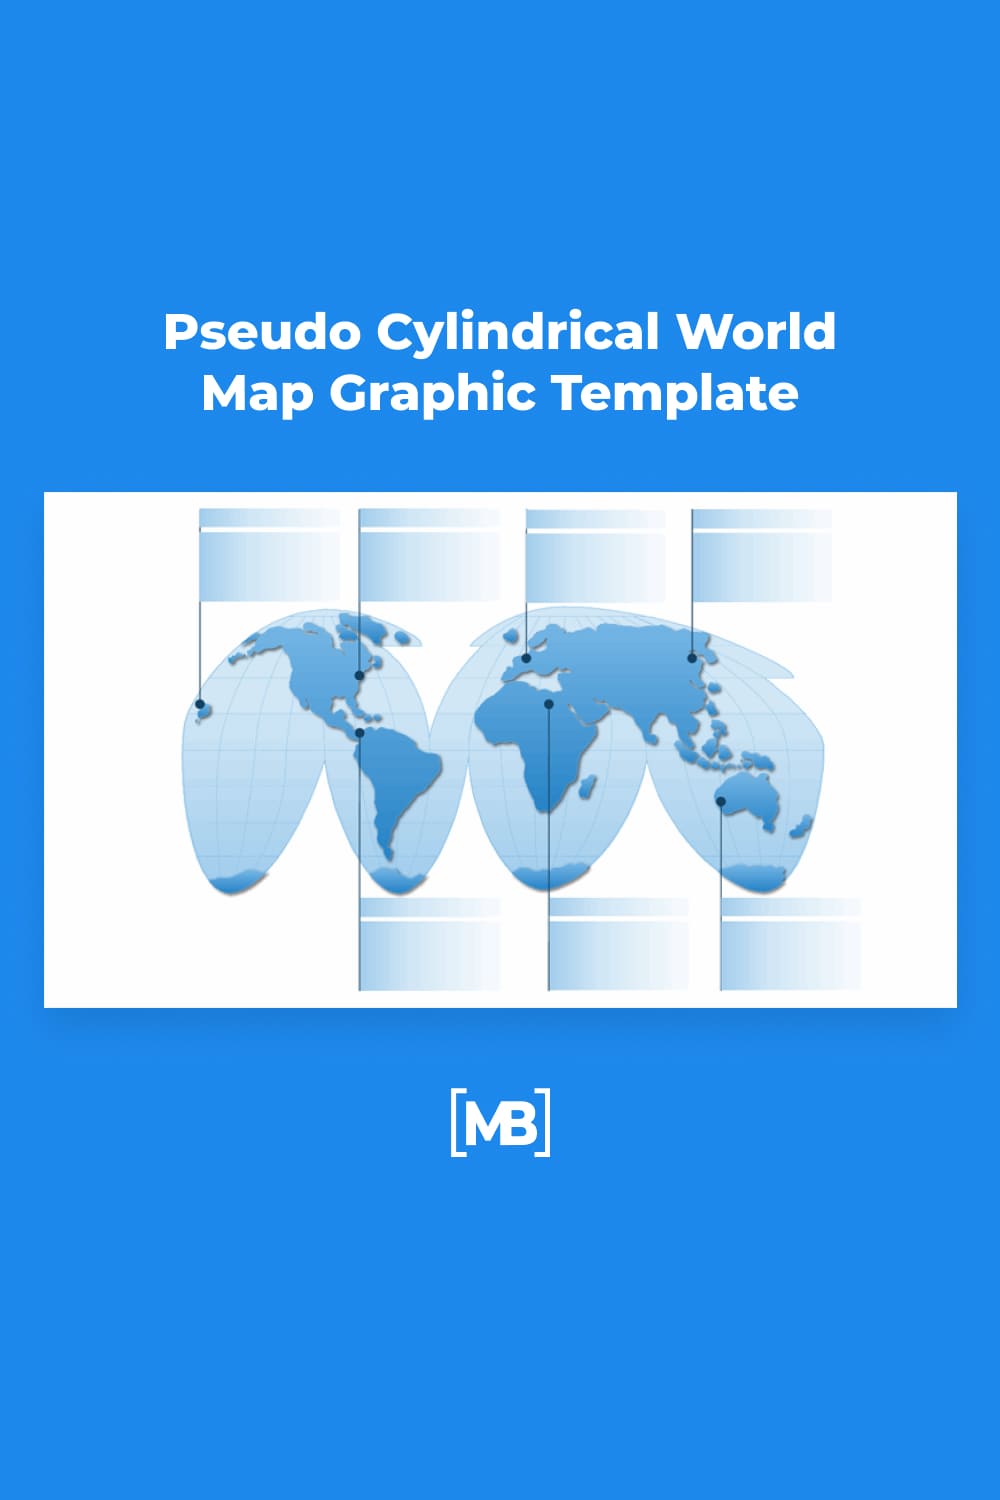 Pseudo cylindrical world map graphic template.